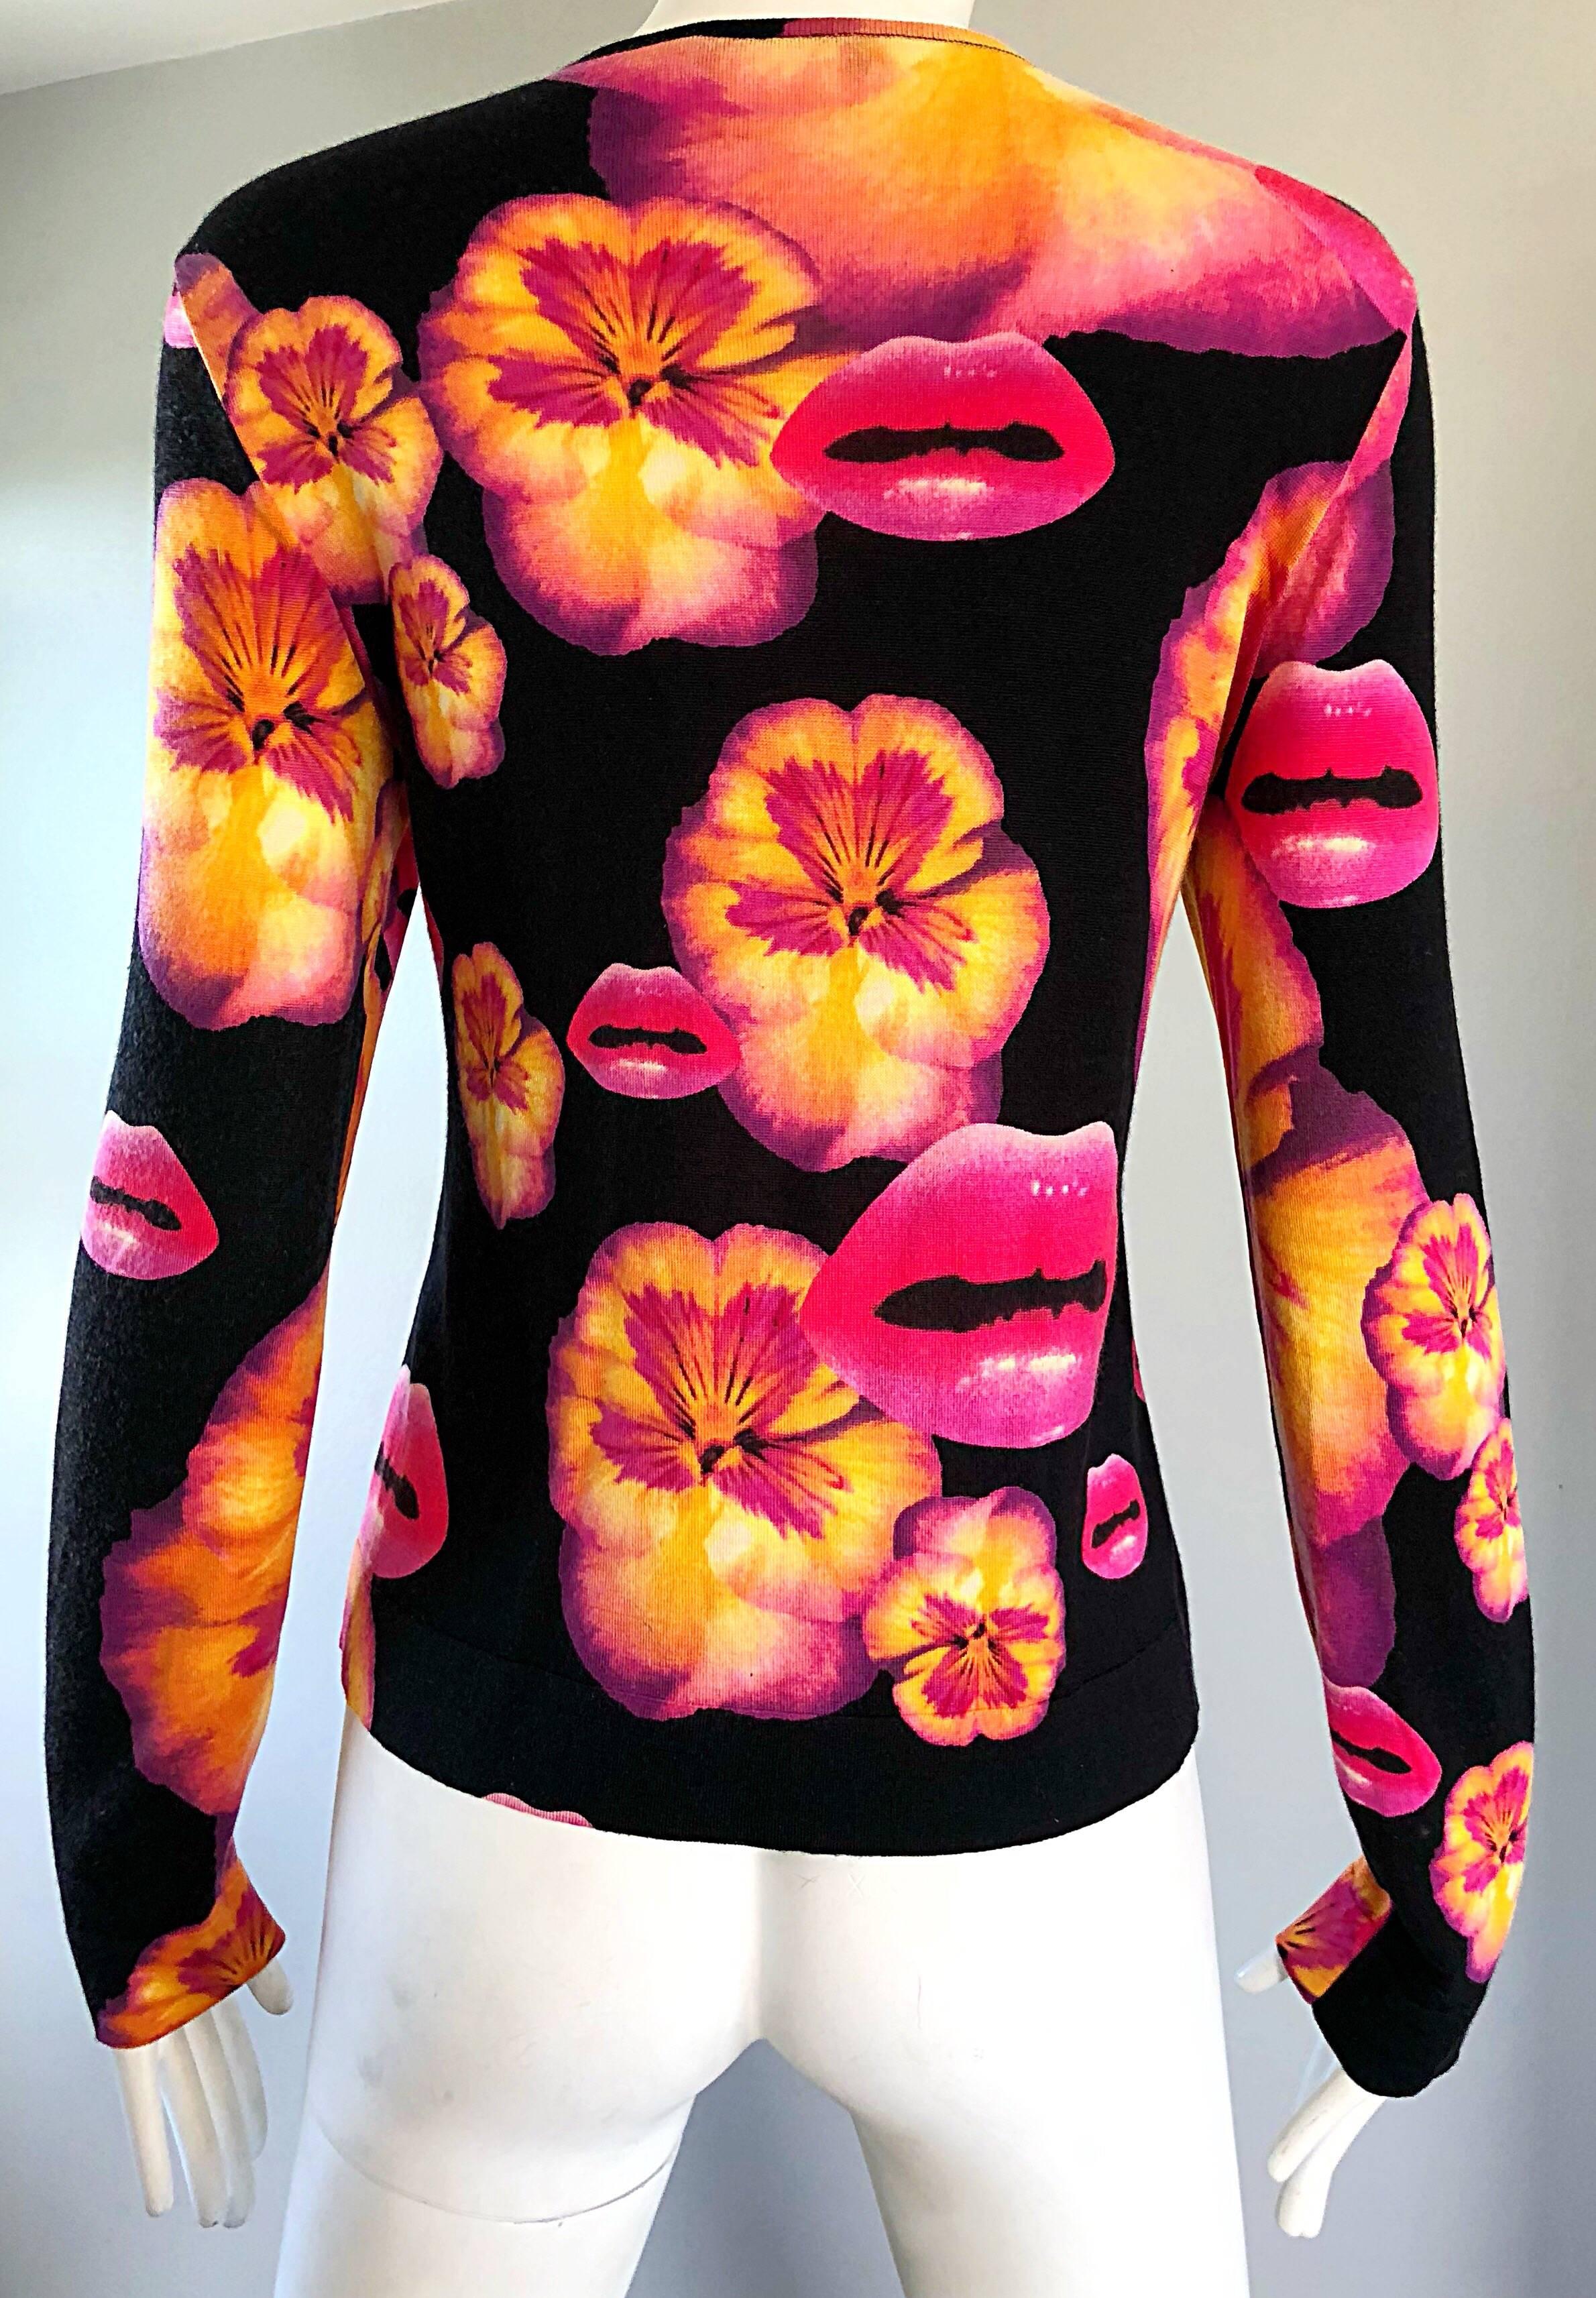 Women's Rare Christian Dior by John Galliano Lips and Pansy Print Cotton Cardigan Top